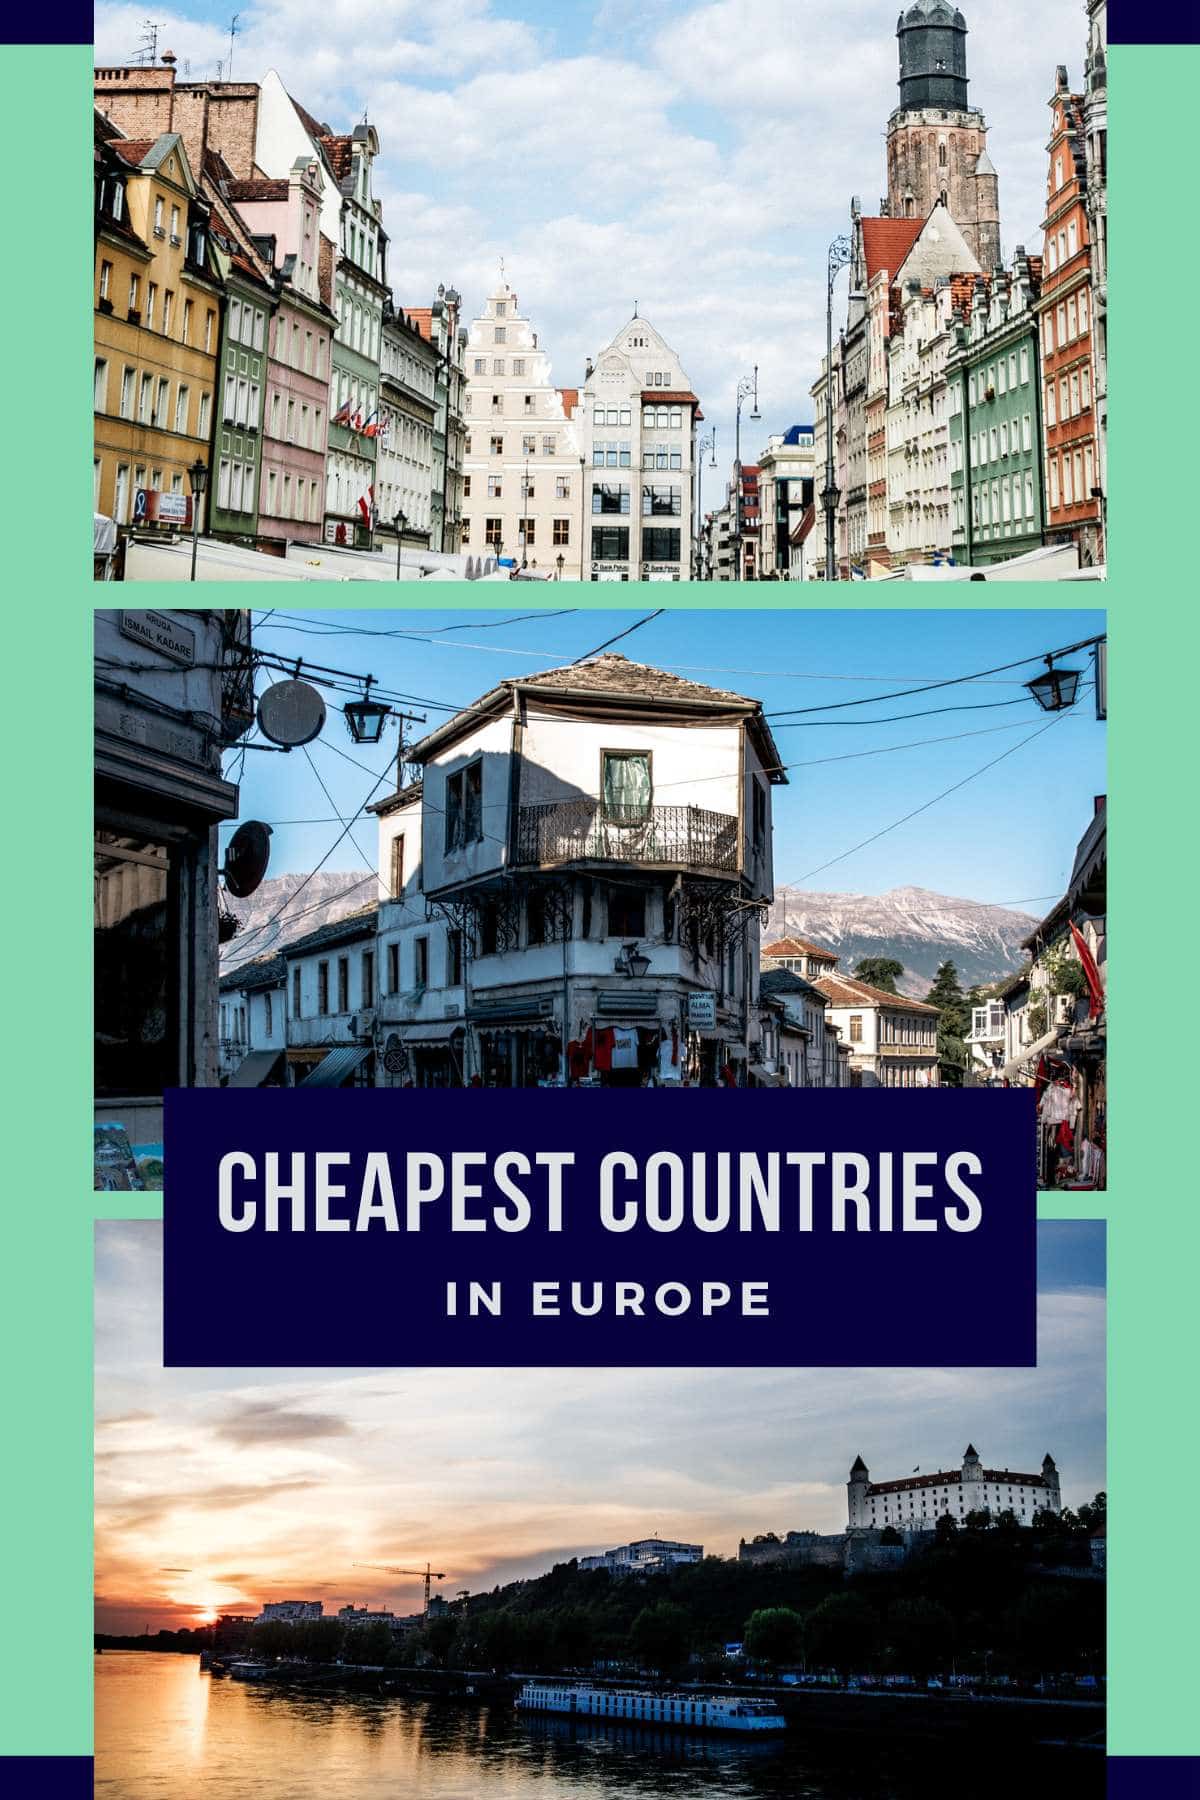 cheapest places to visit europe 2023